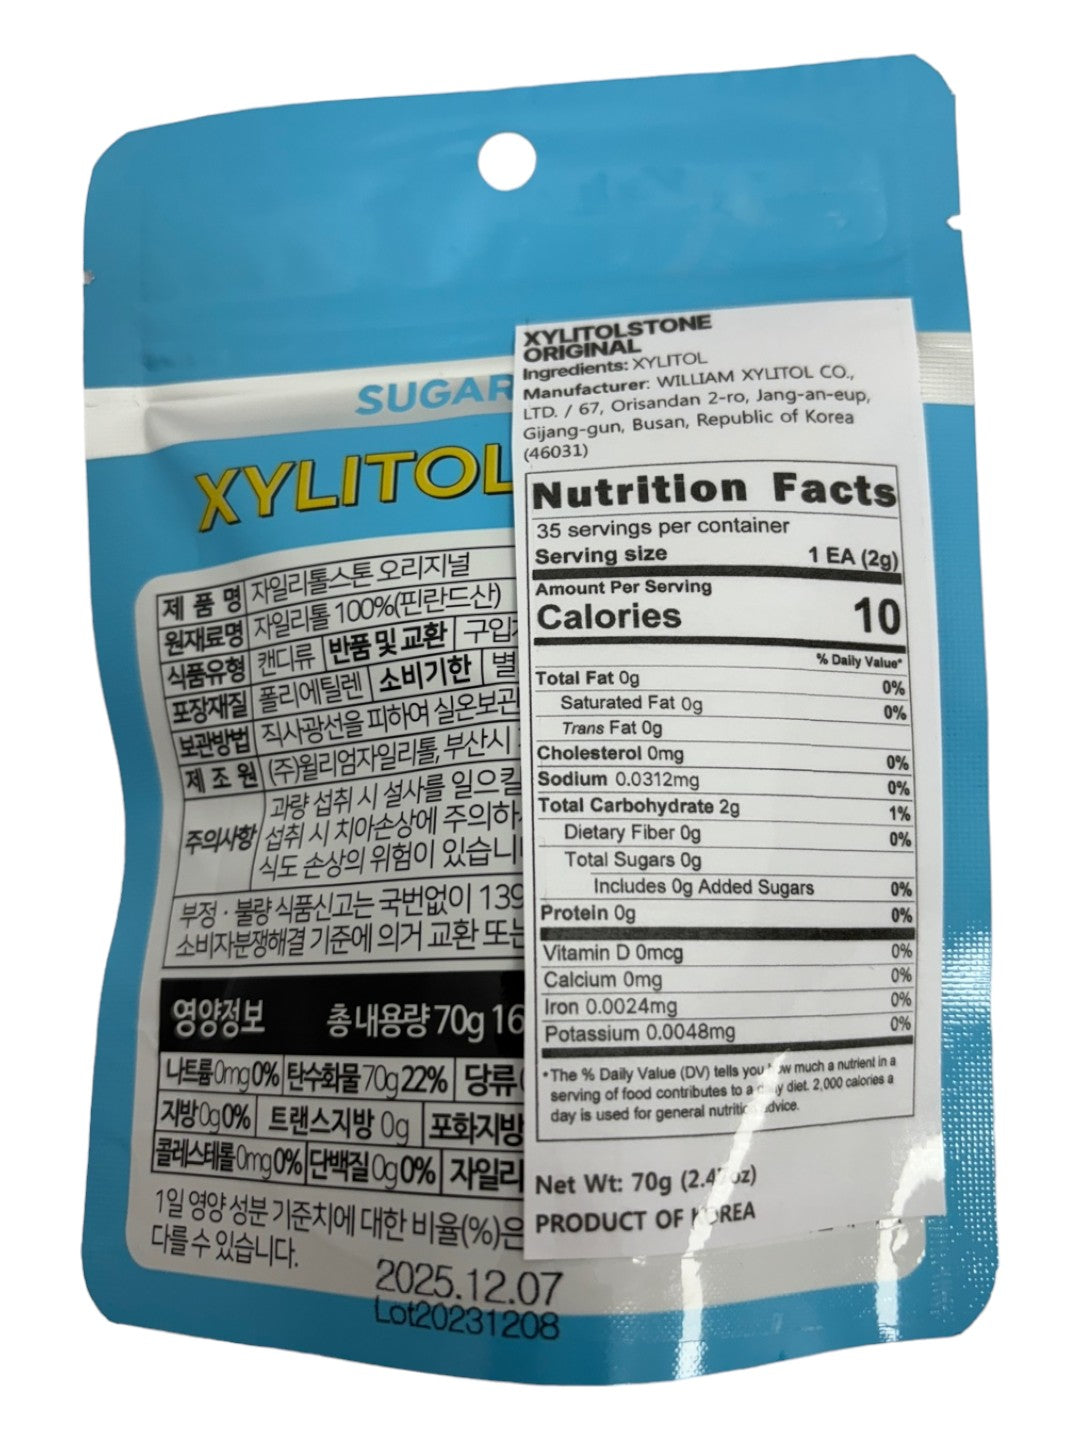 Xylitol Stone Sugar Free Candy 70G Resealable Pouch, Original